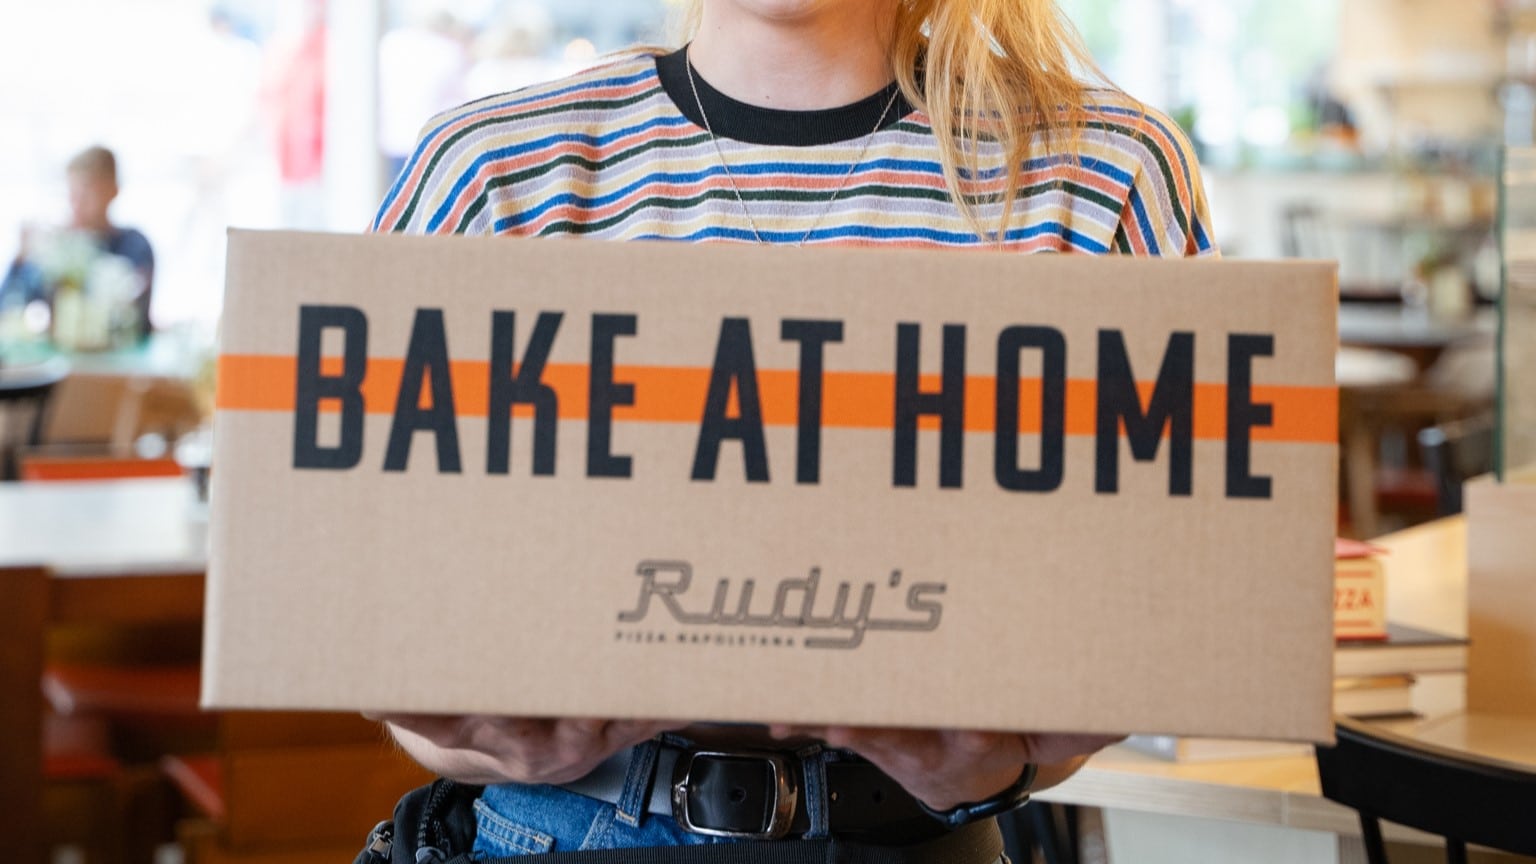 A woman holding a box of Rudy's Bake At home pizzas